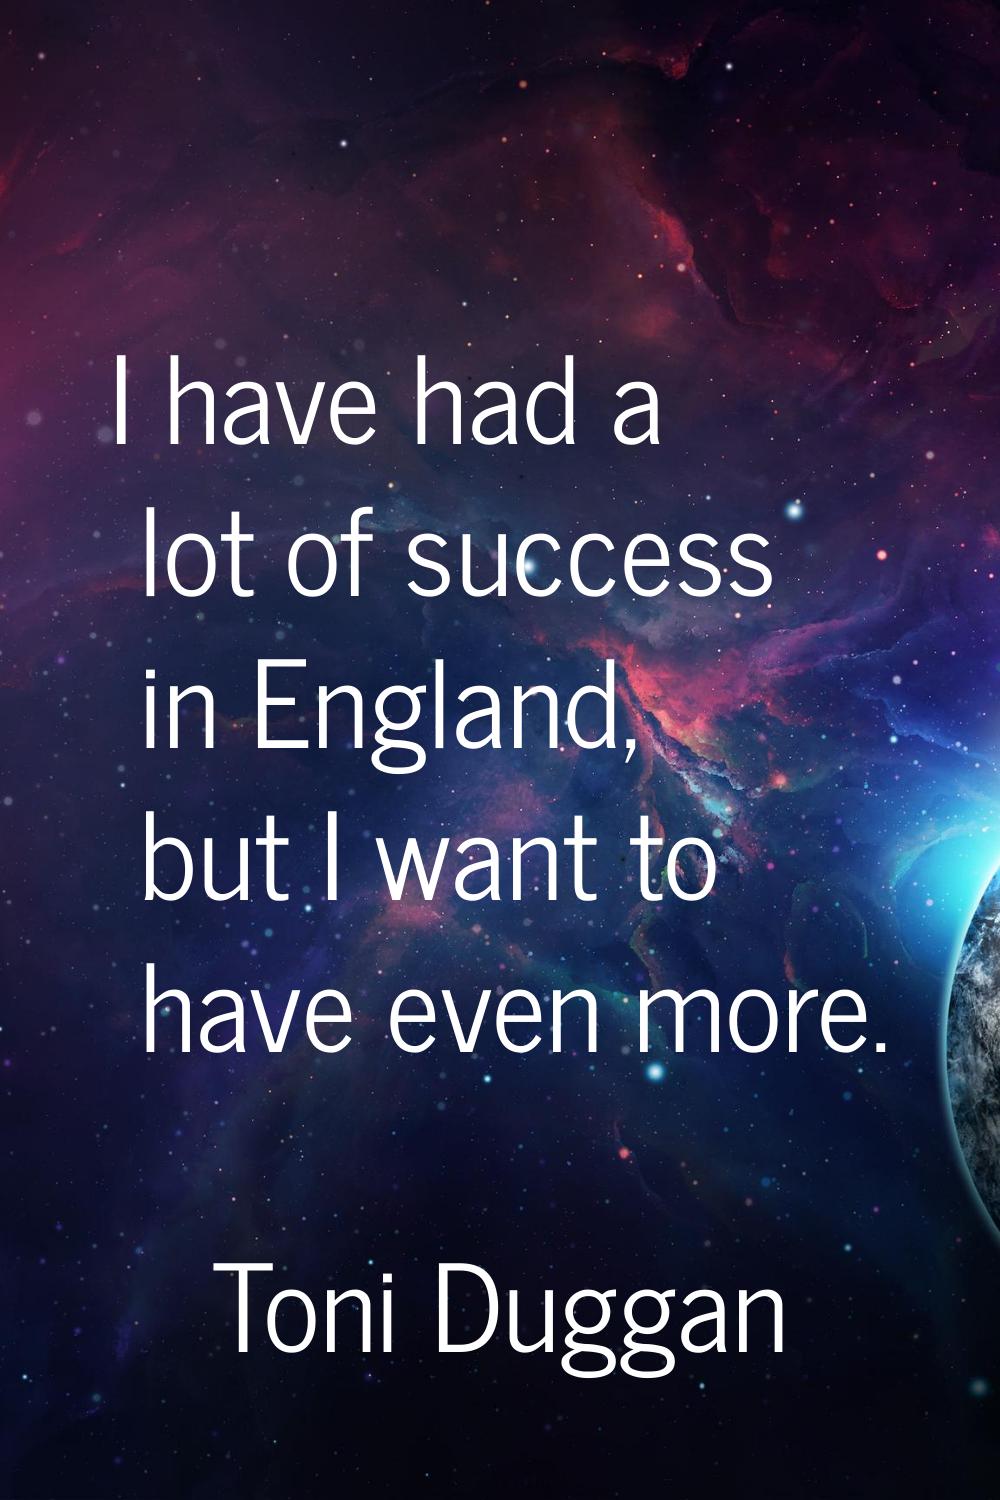 I have had a lot of success in England, but I want to have even more.